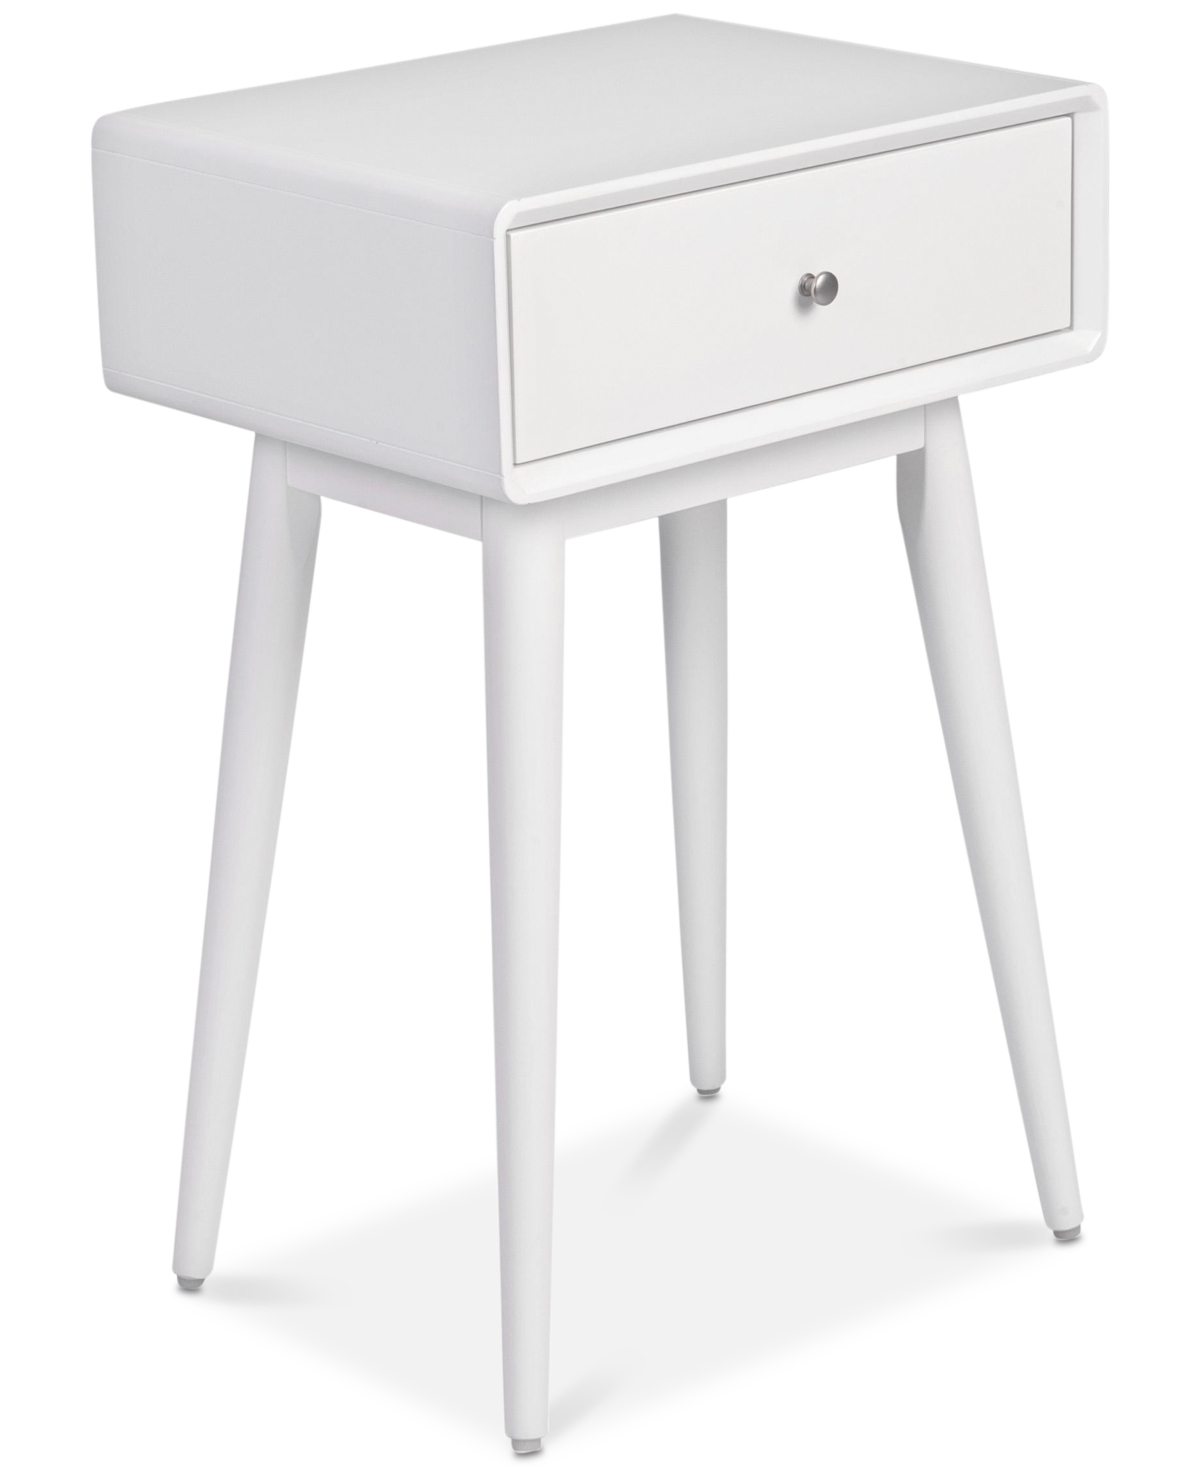 6972020 Elle Decor Rory 1-Drawer Side Table, Quick Ship sku 6972020